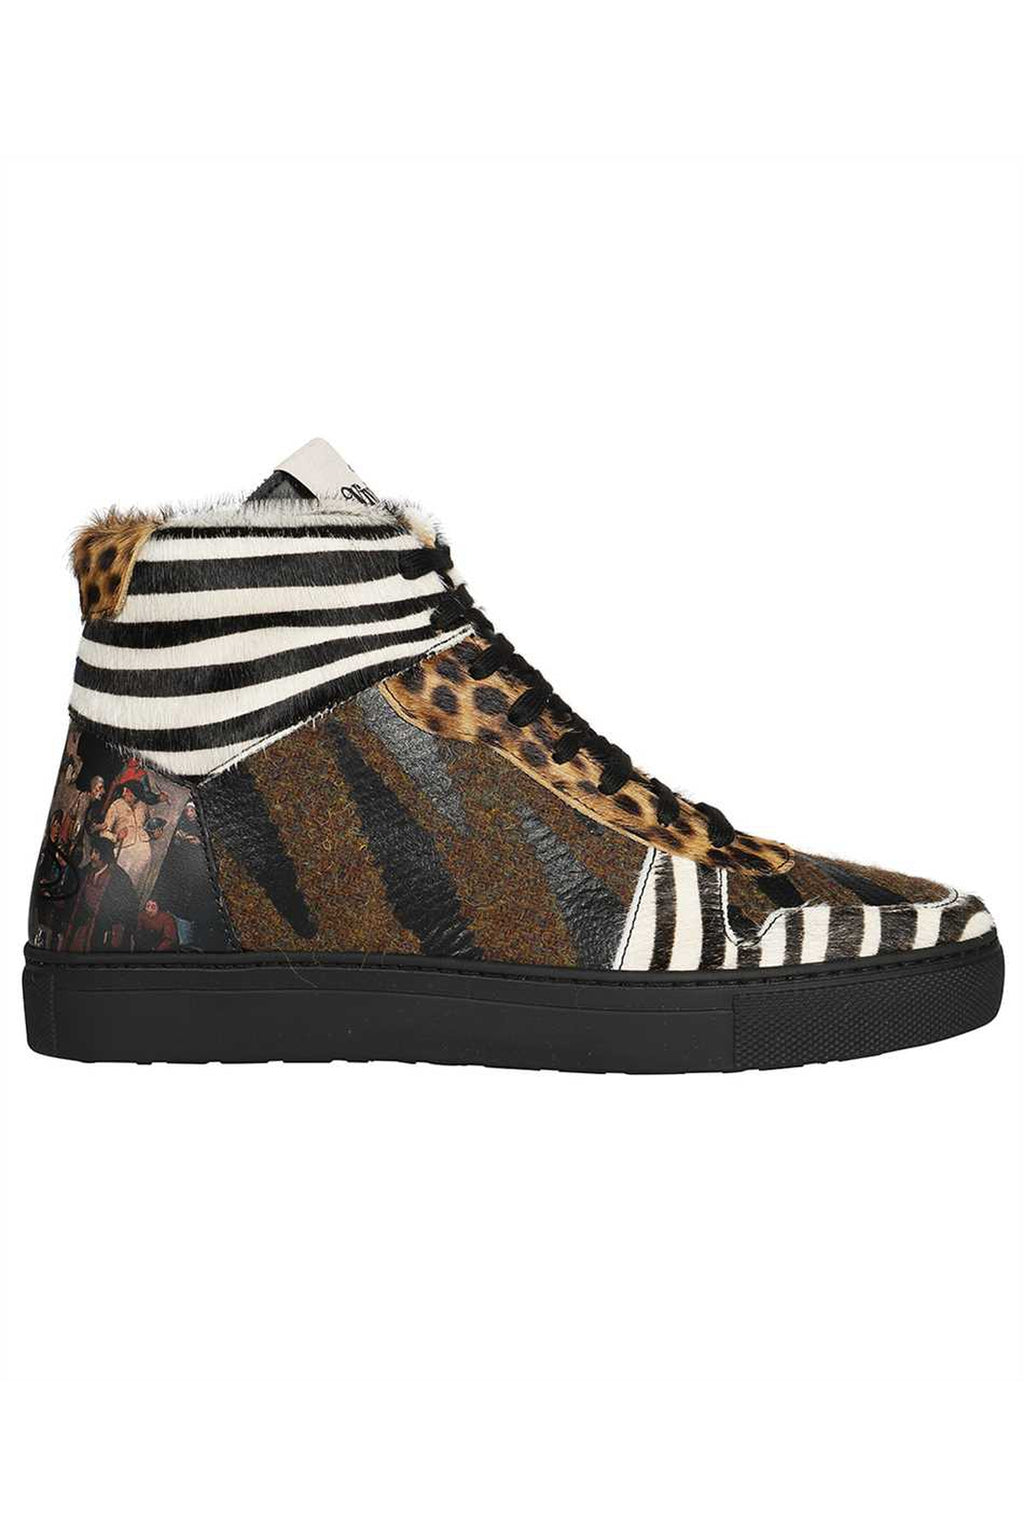 Vivienne Westwood-OUTLET-SALE-The Classic high-top sneakers-ARCHIVIST